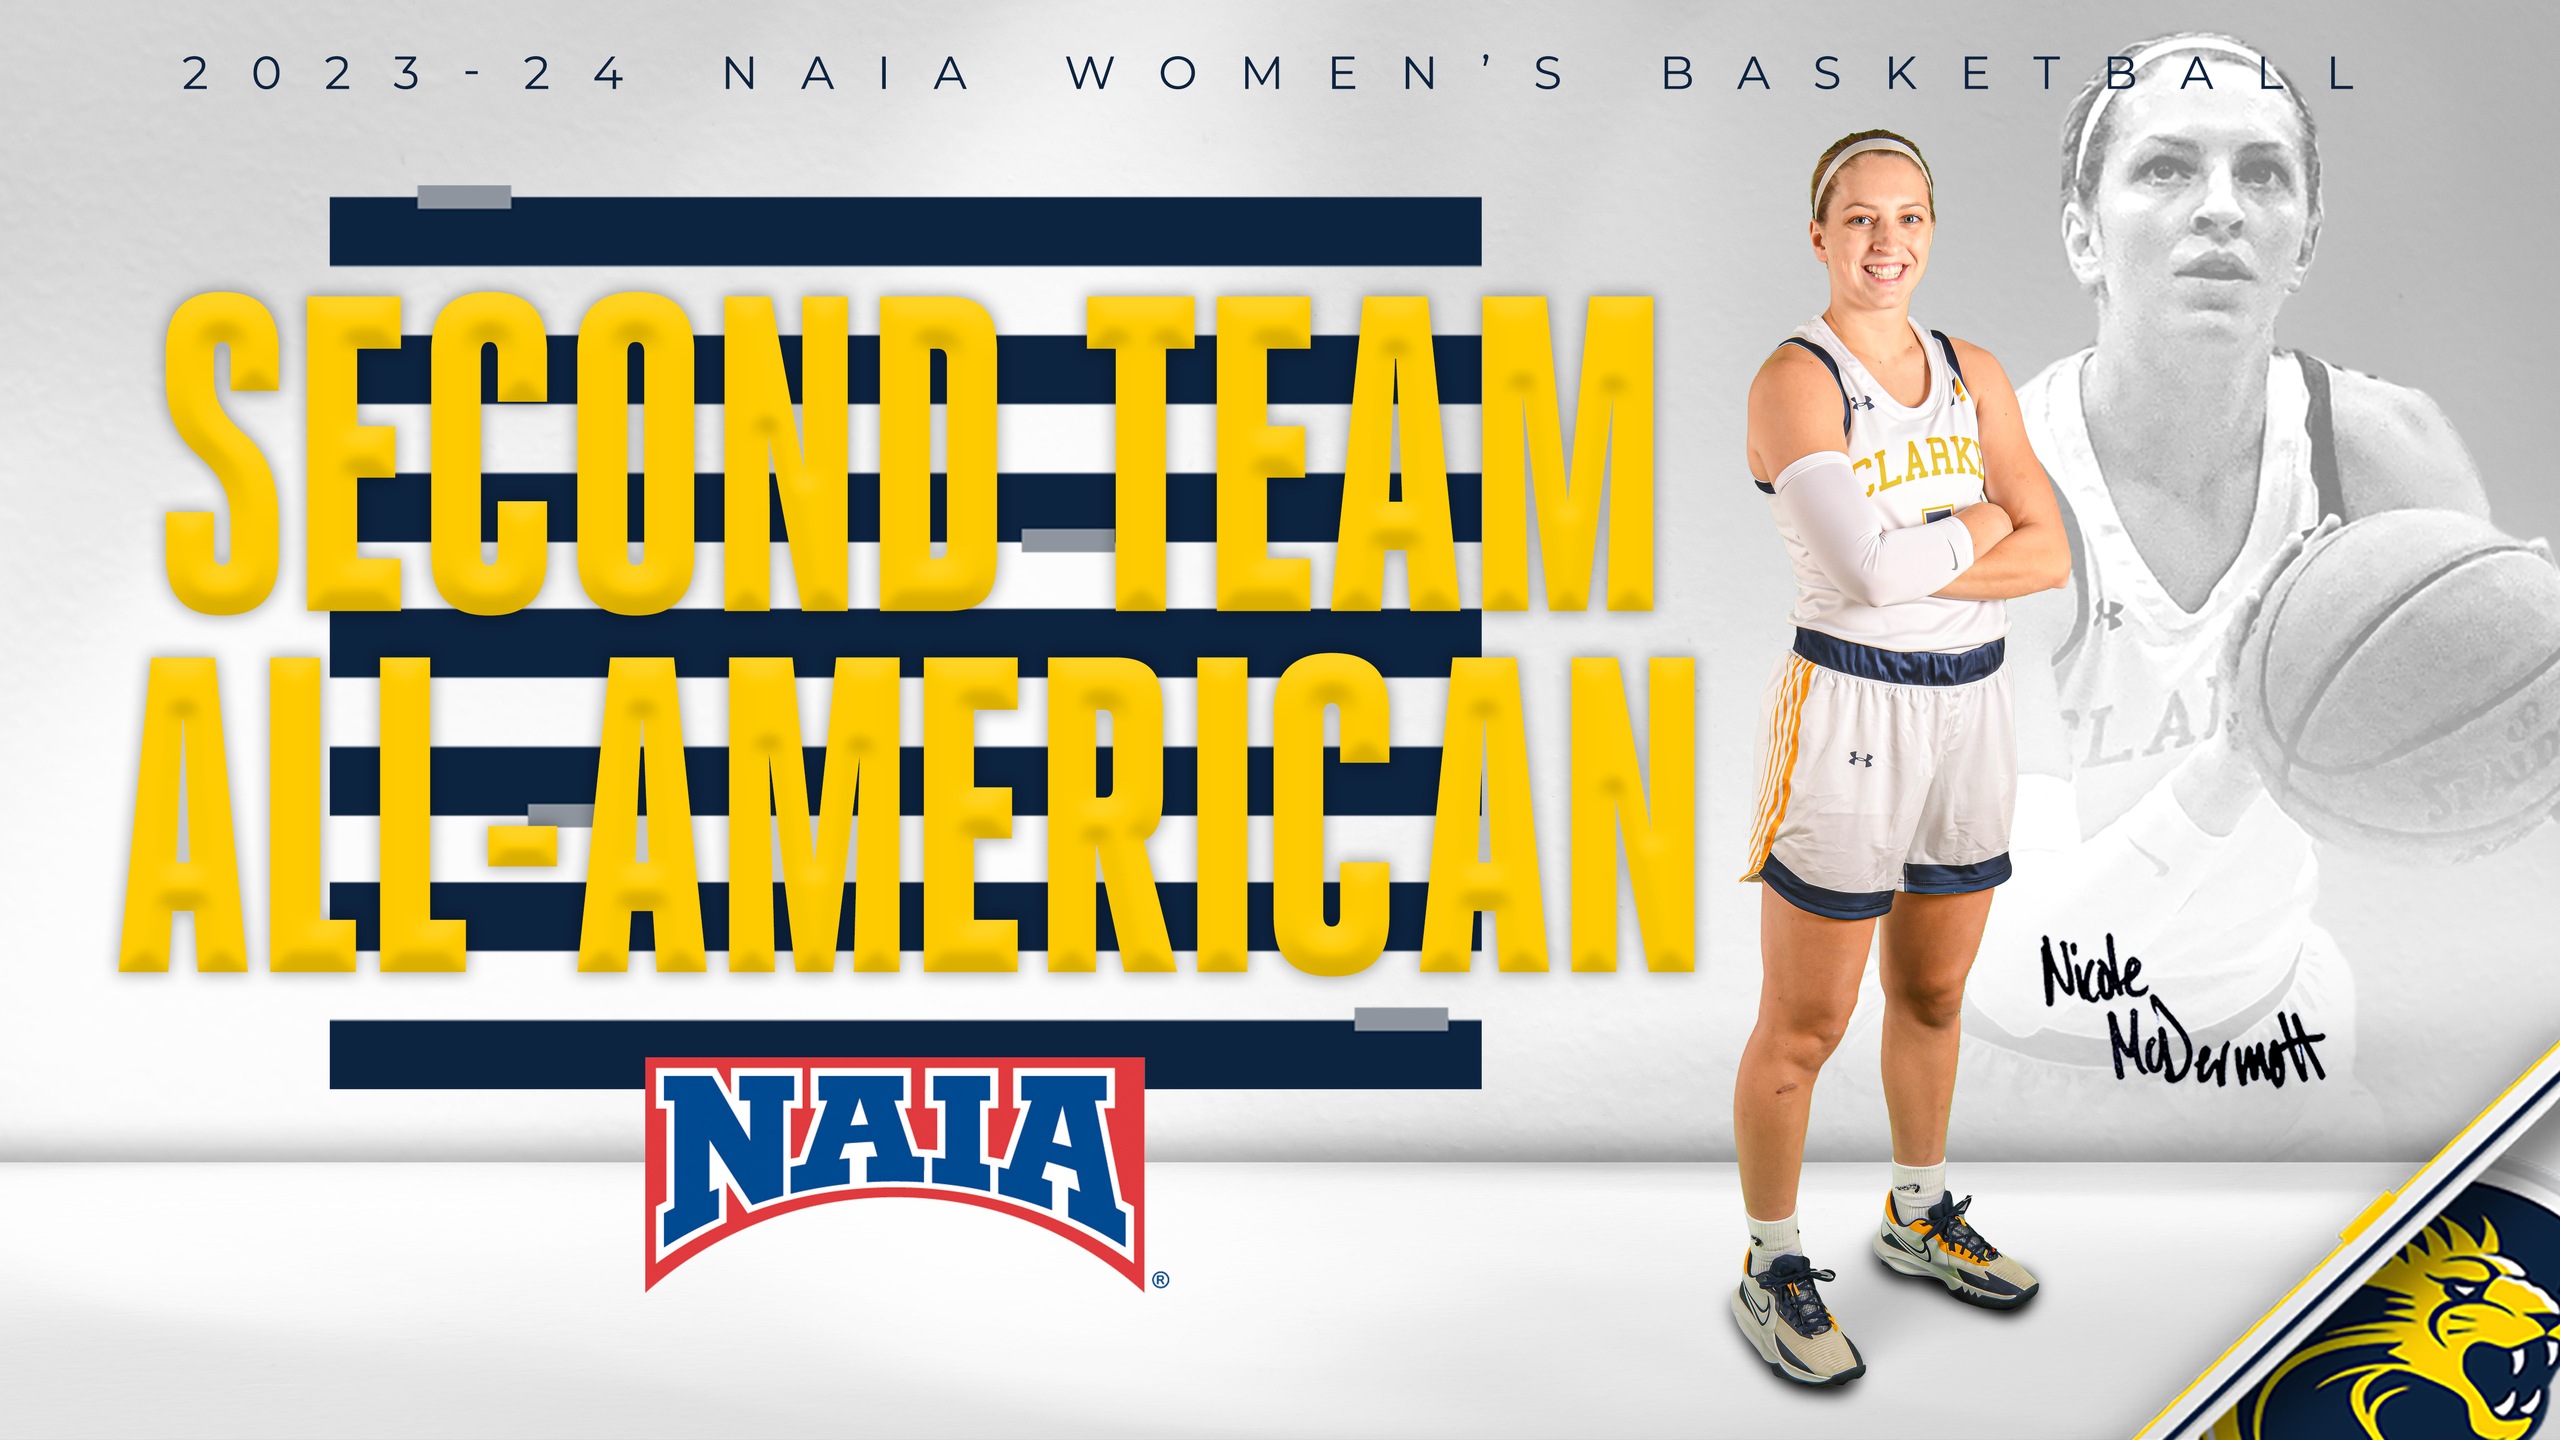 McDermott earns NAIA All-America Second Team honors for first time in her career